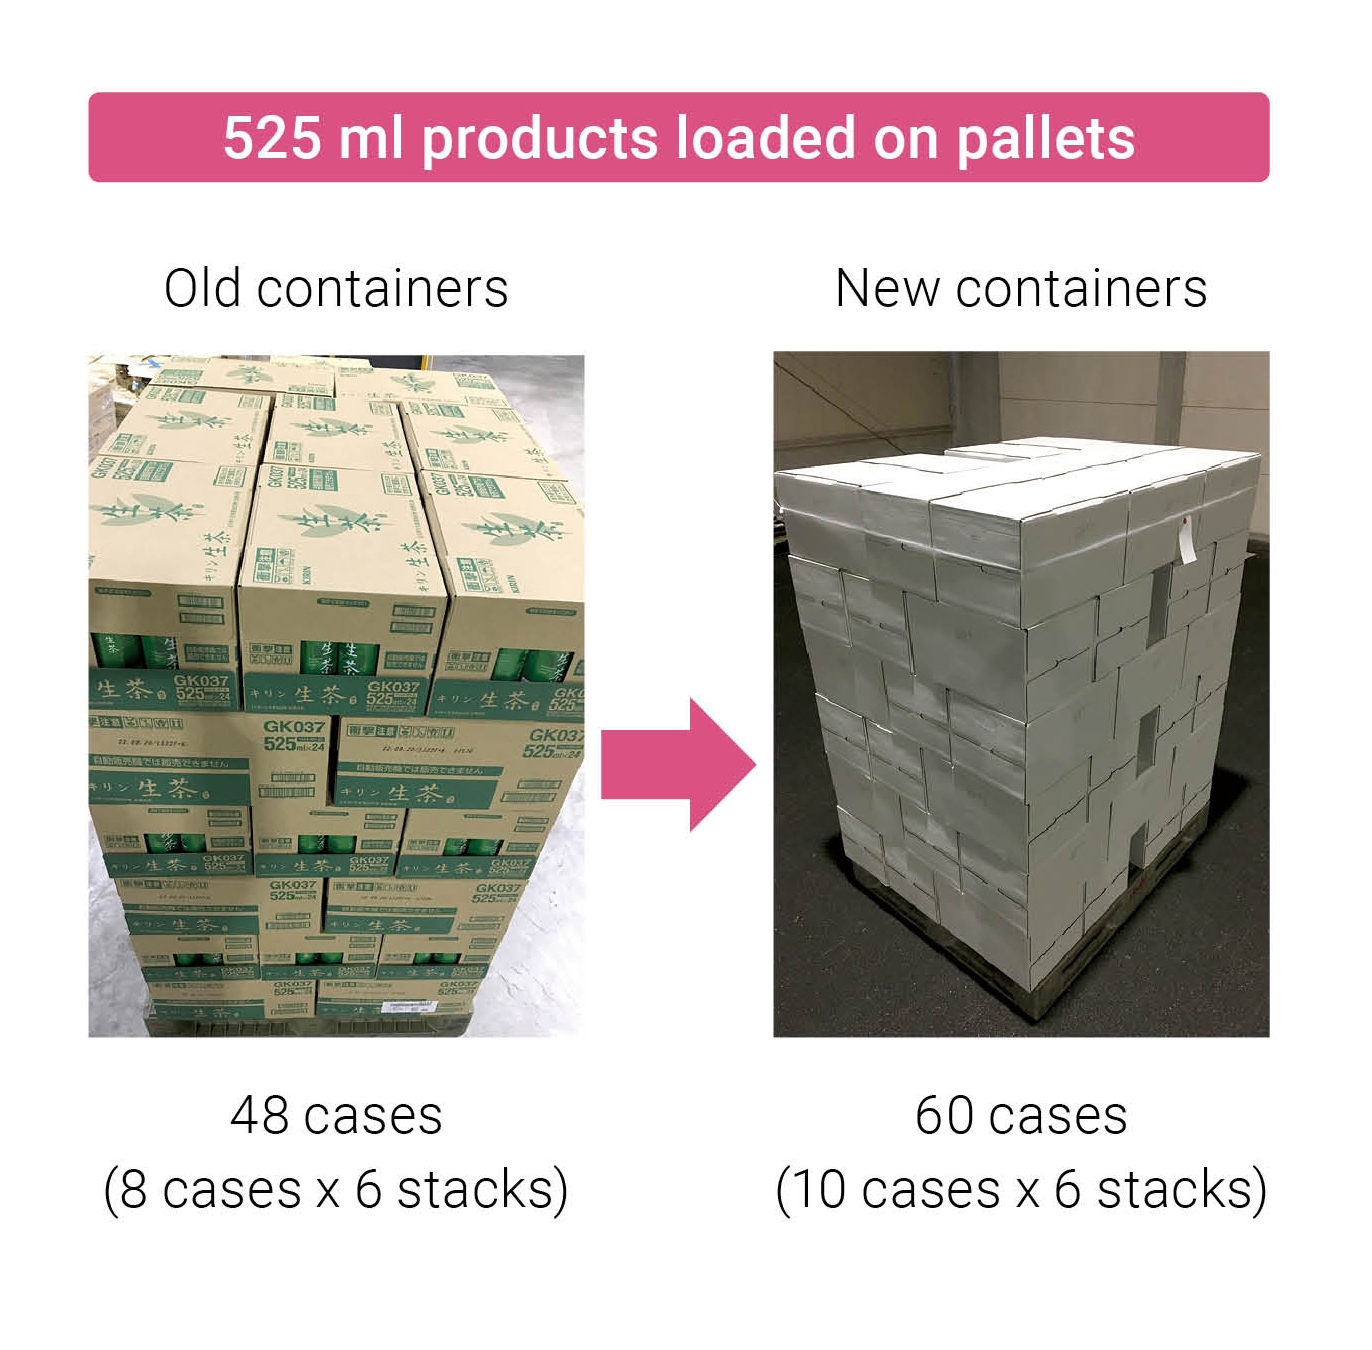 525ml products loaded on pallets